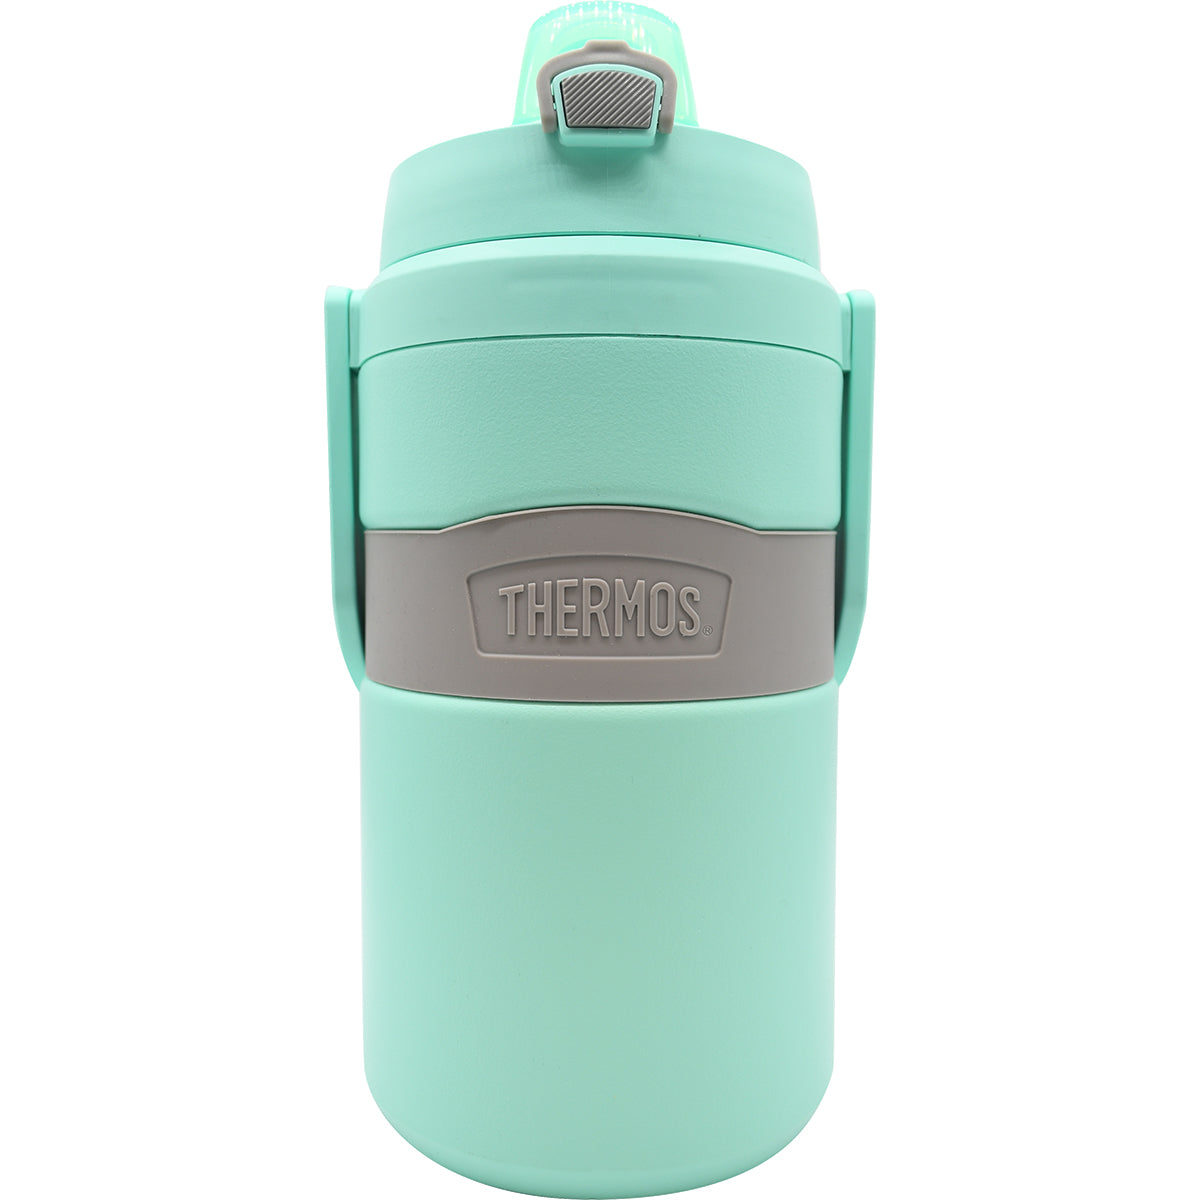 Thermos 64 oz. Foam Insulated Hydration Bottle Thermos